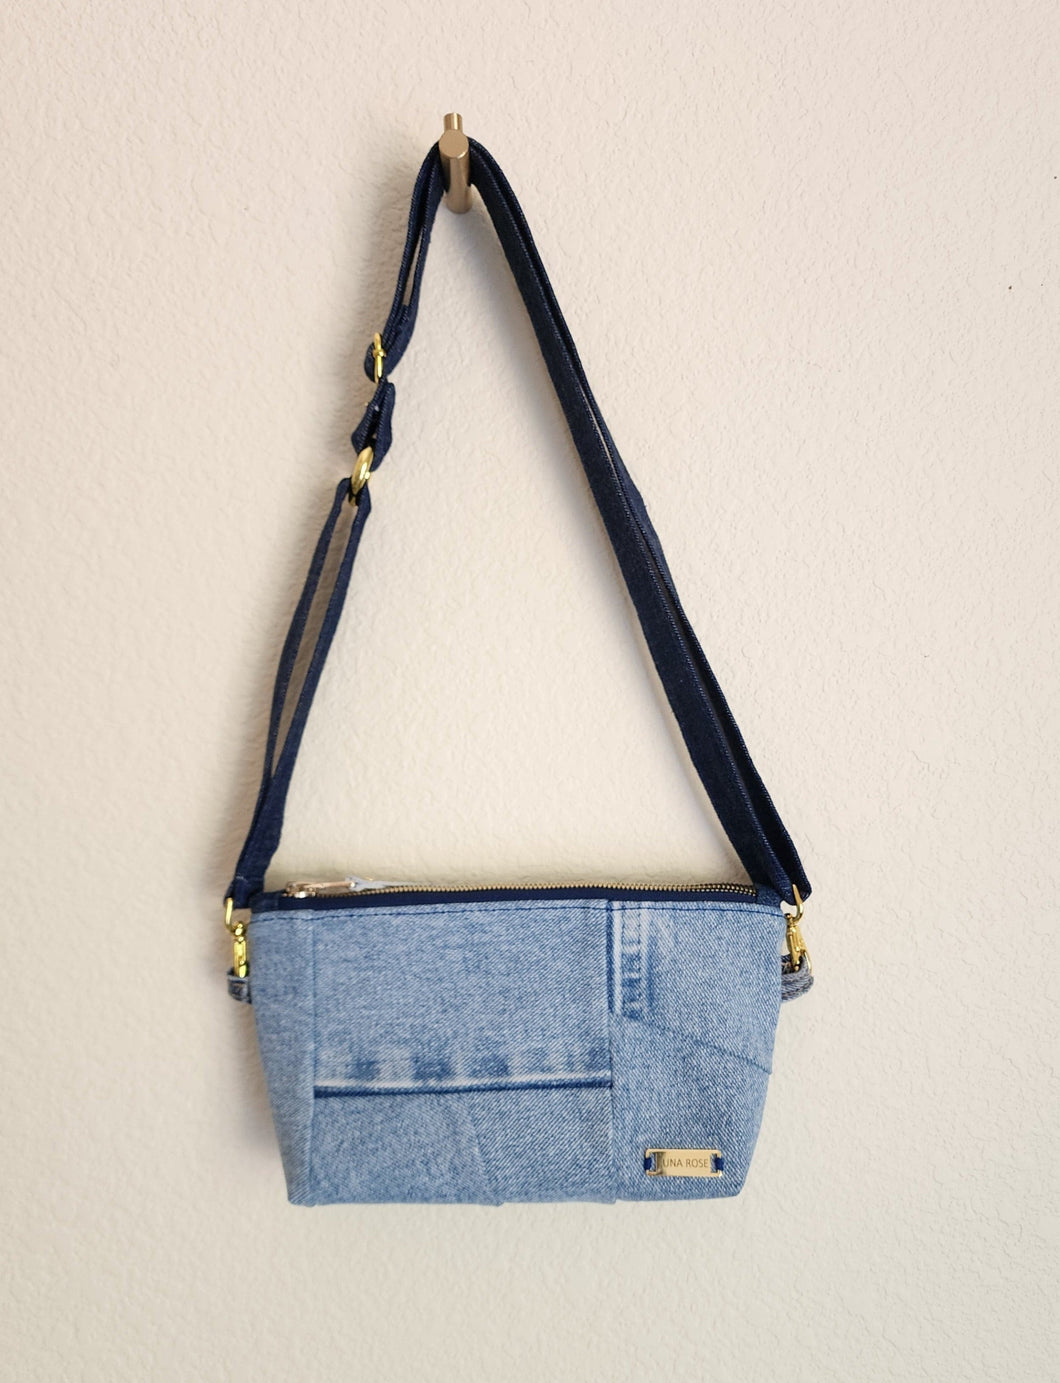 Crossbody bag showing hanging from the dark blue shoulder stap that also connects to wristlet band.  Repurposed denim to a natural luxury look. The look is soft contemporary look in repurposed denim. Great as a vegan choice.